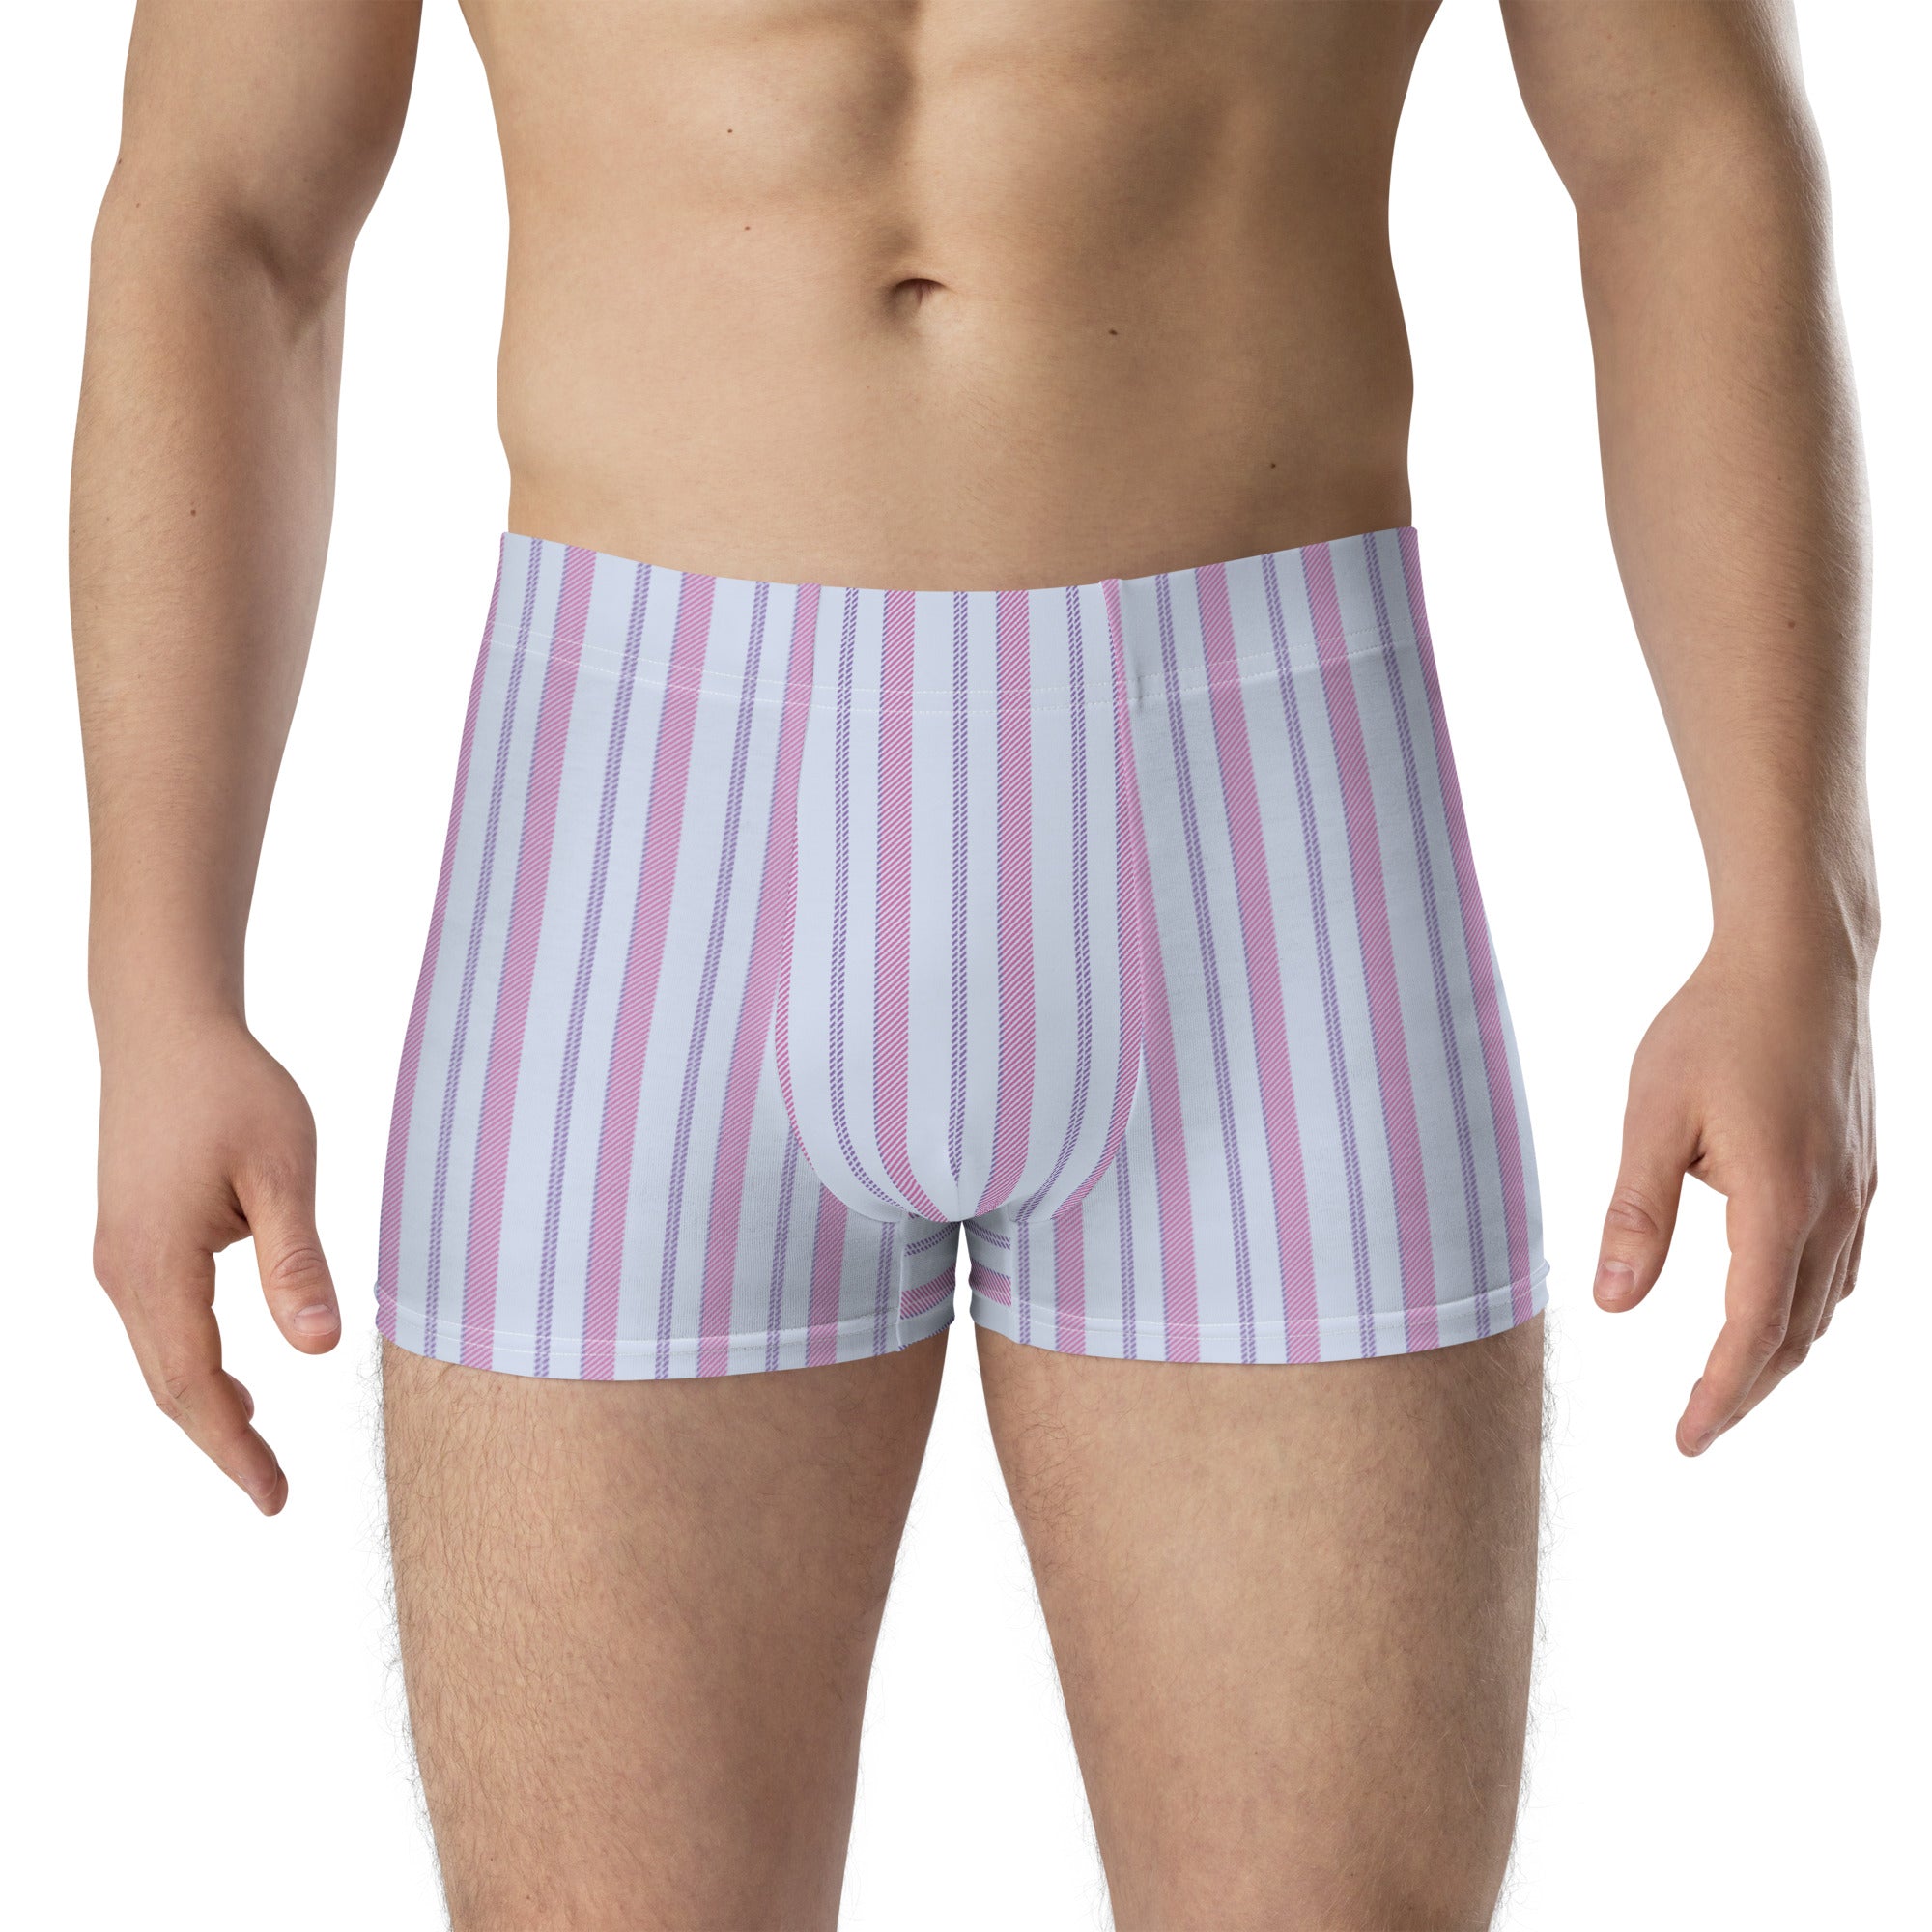 Stylish patterned boxer shorts with vertical stripes